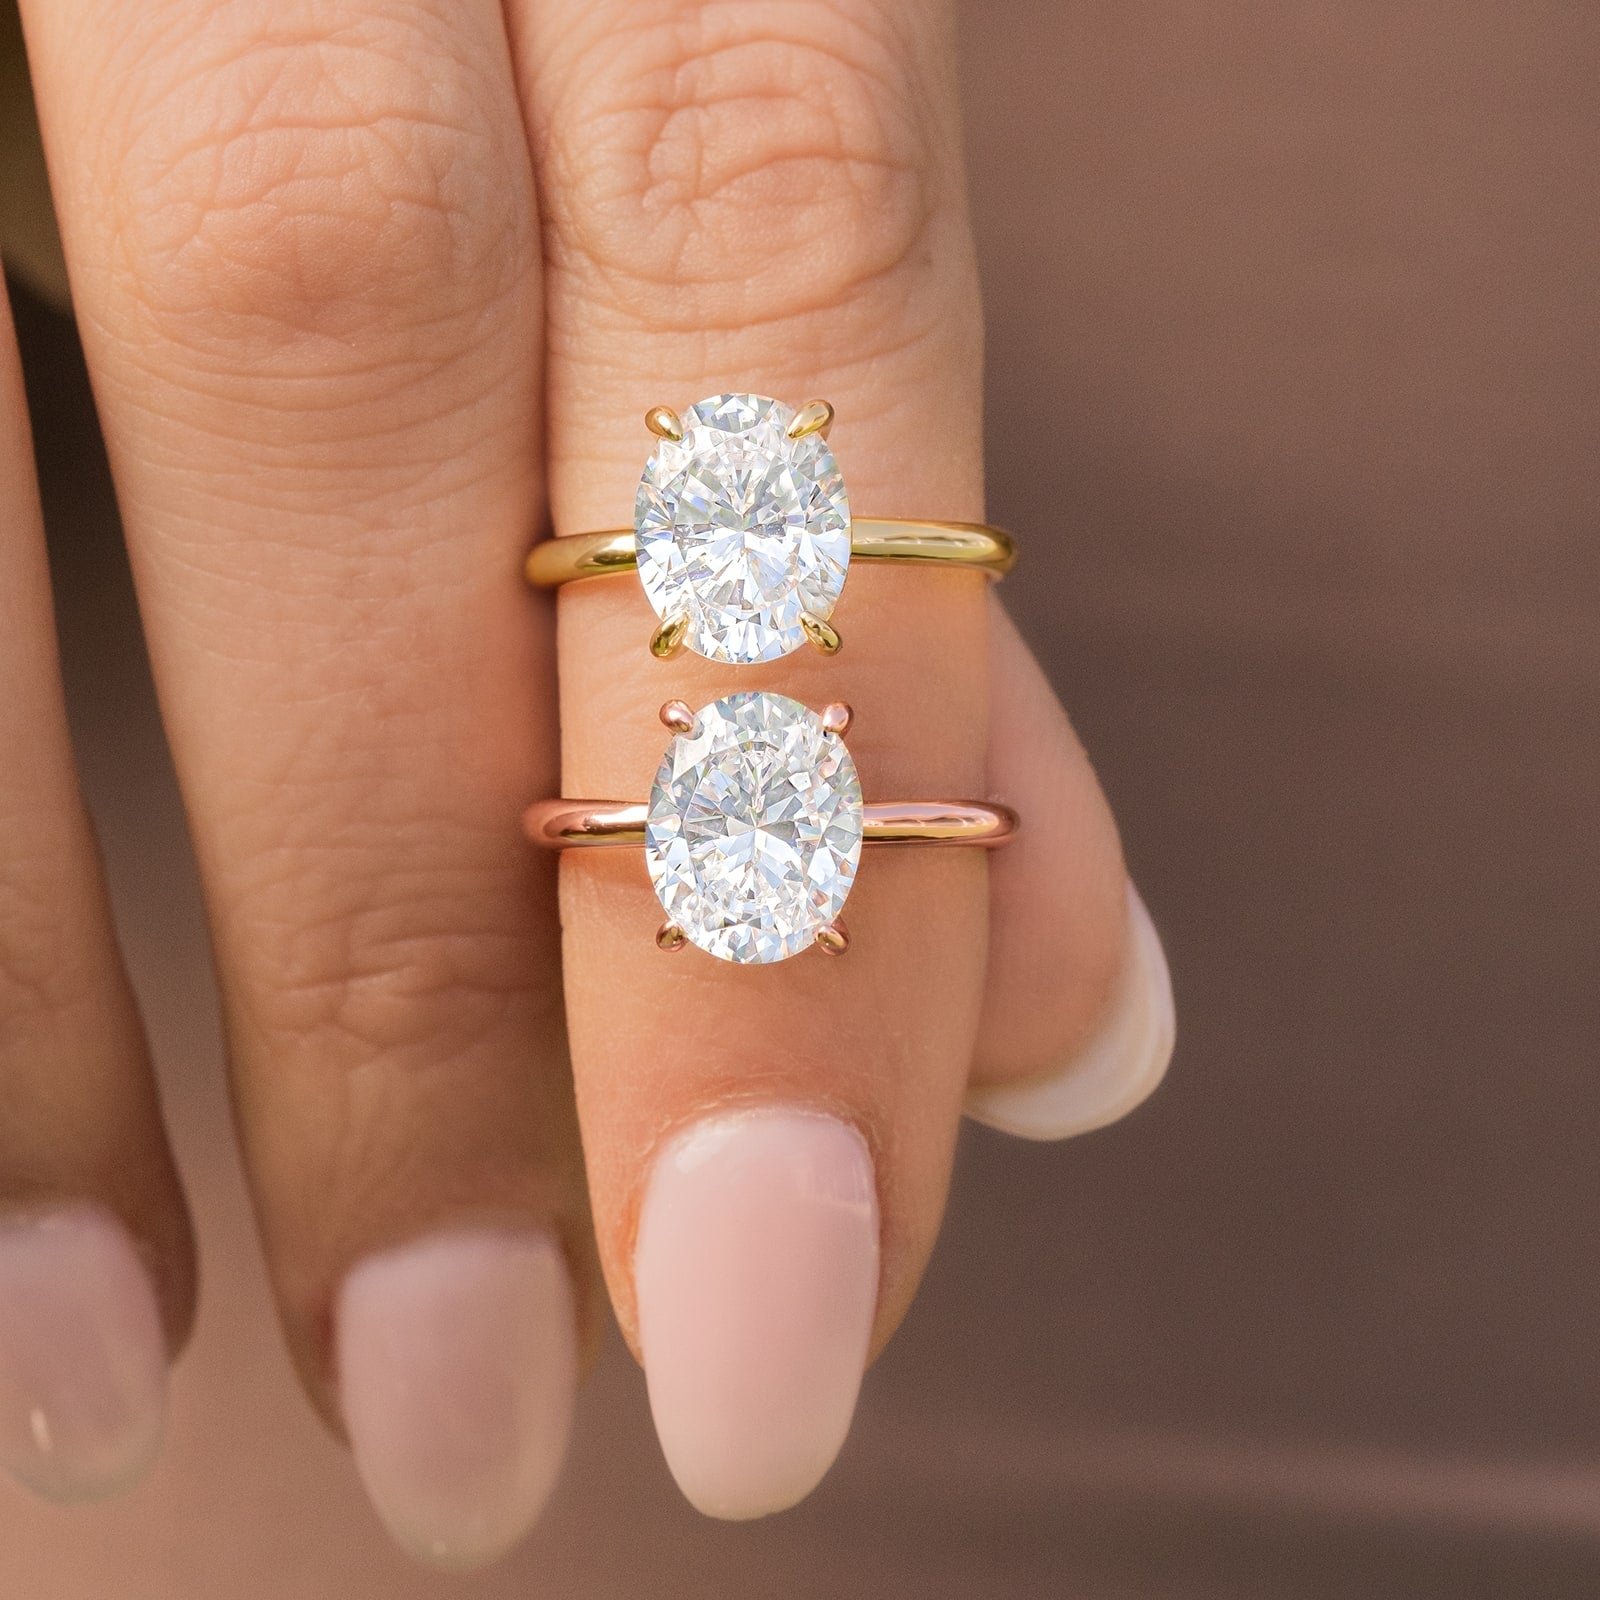 Are Cheap Engagement Rings Bad? We Set the Record Straight – Modern Gents